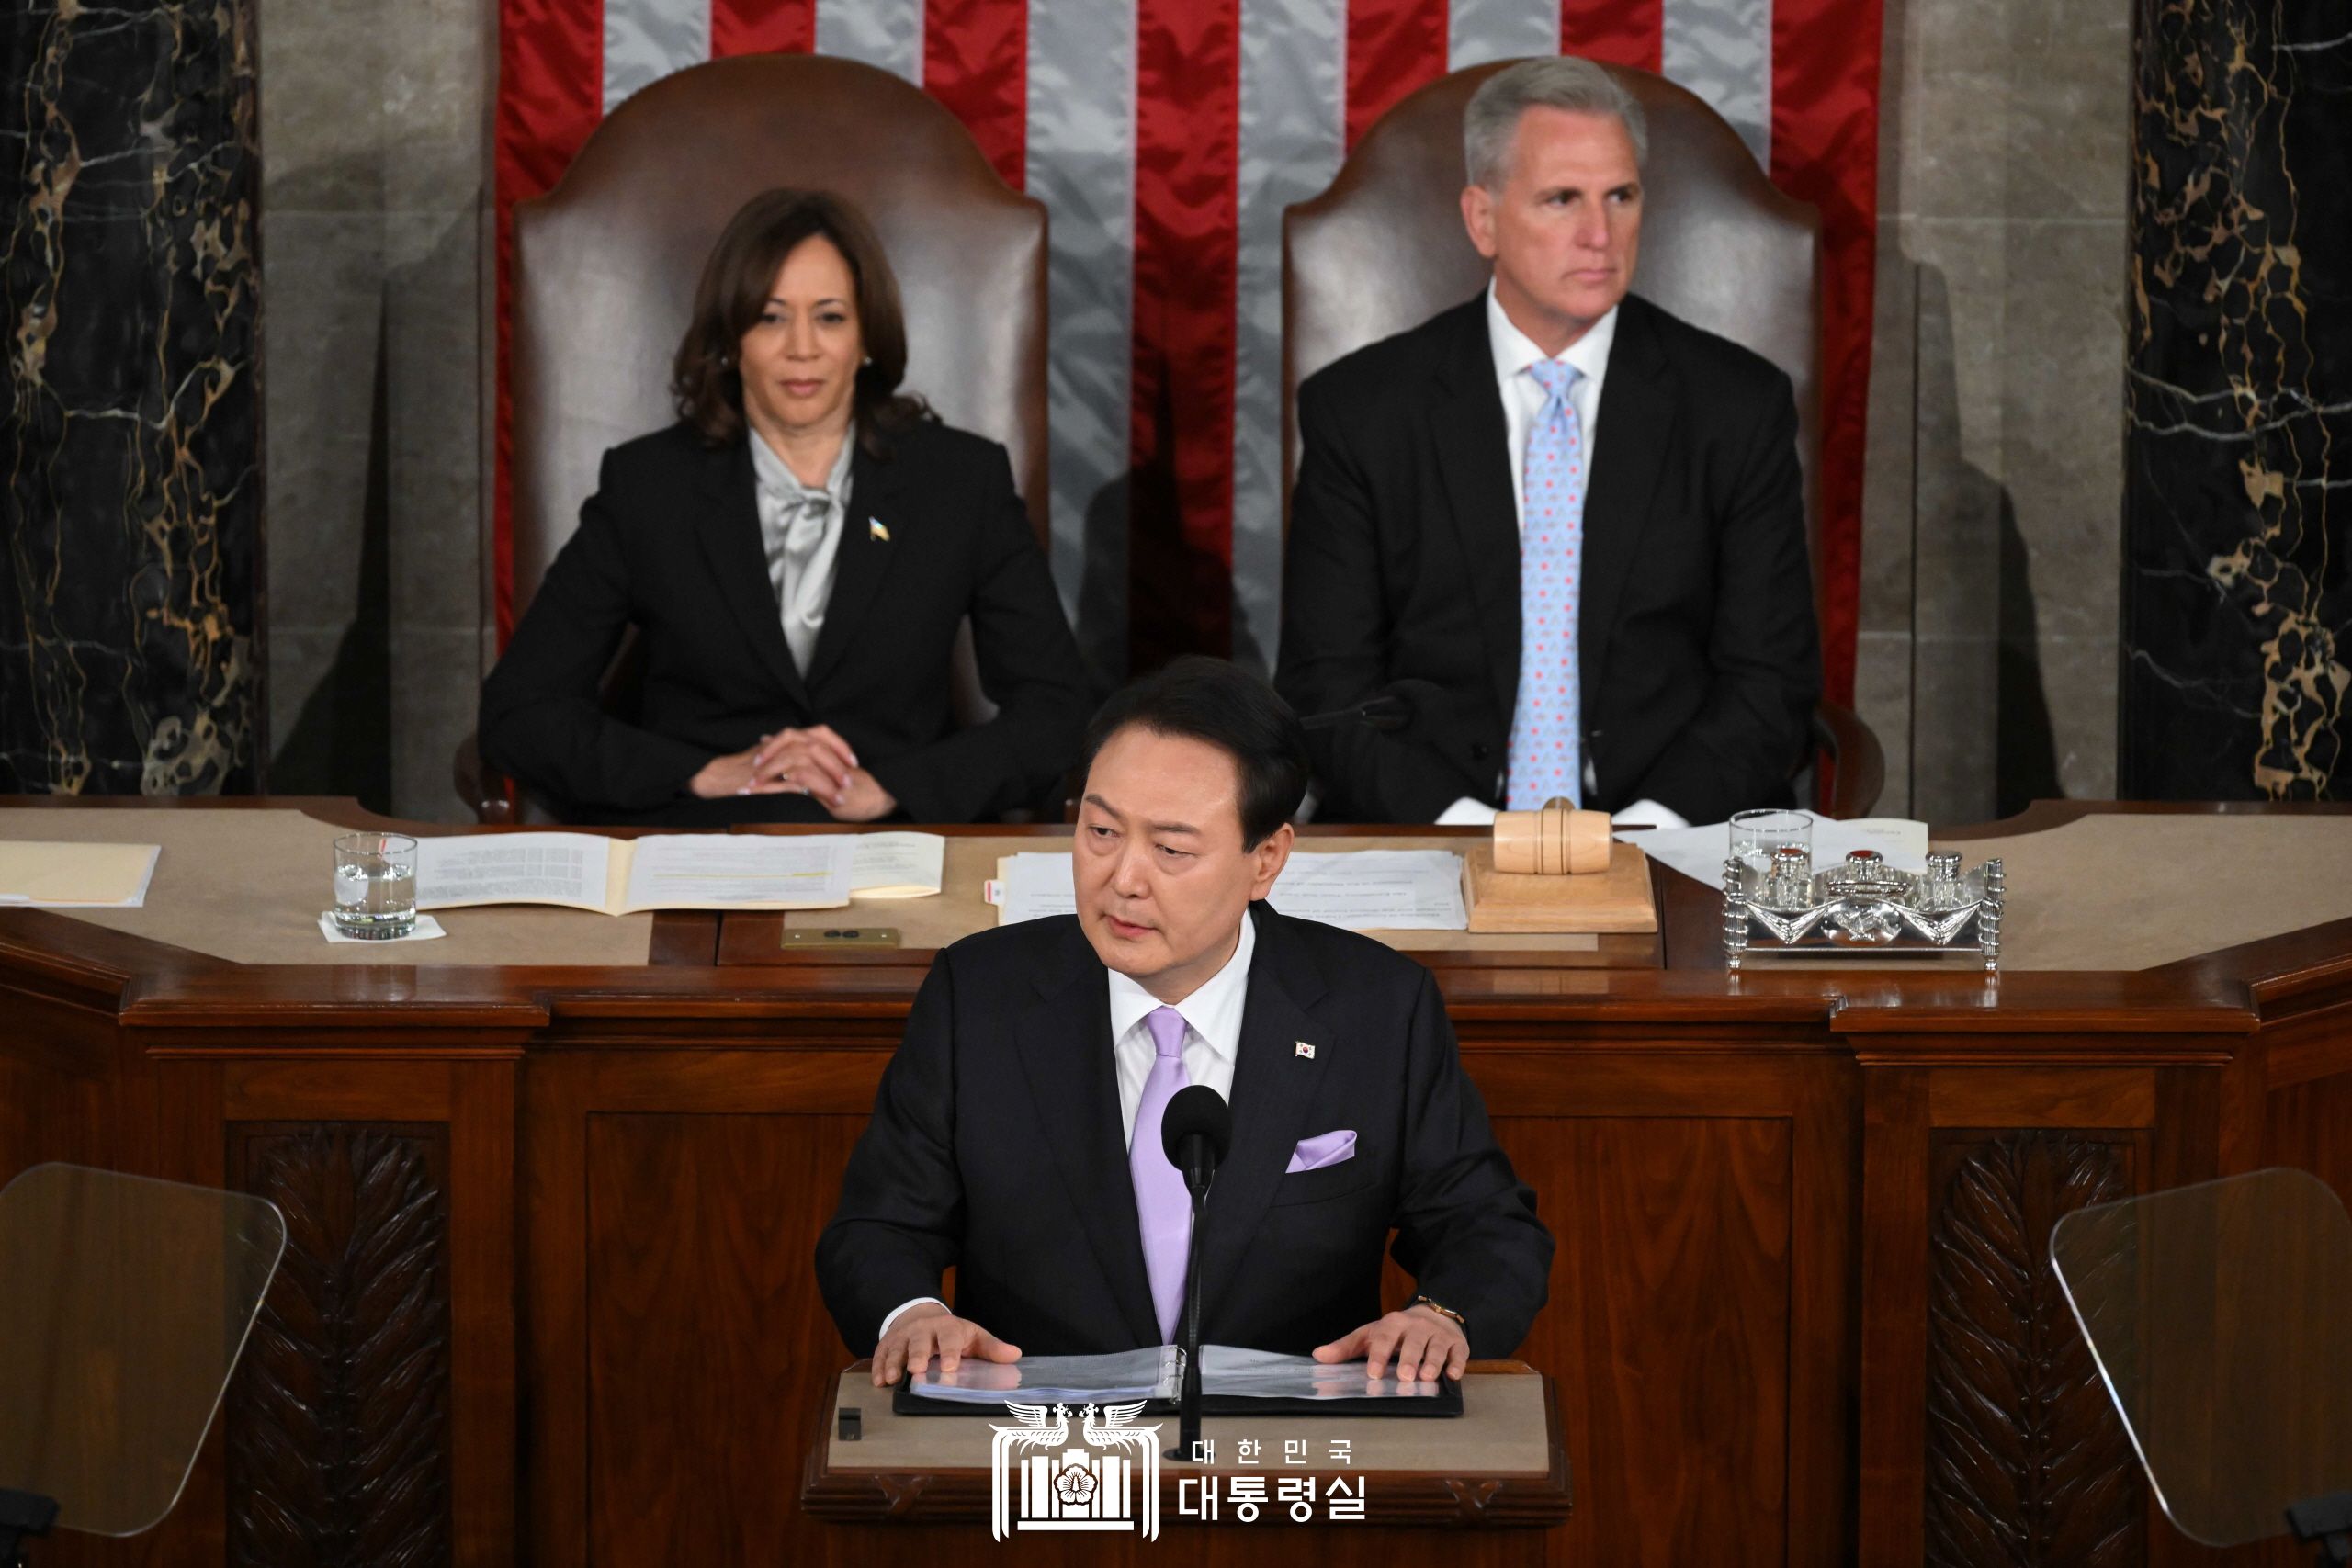 [Office of President of the Republic of Korea] Address to a Joint Meeting of the U.S. Congress in Commemoration of the 70th Anniversary of the ROK-U.S. Alliance